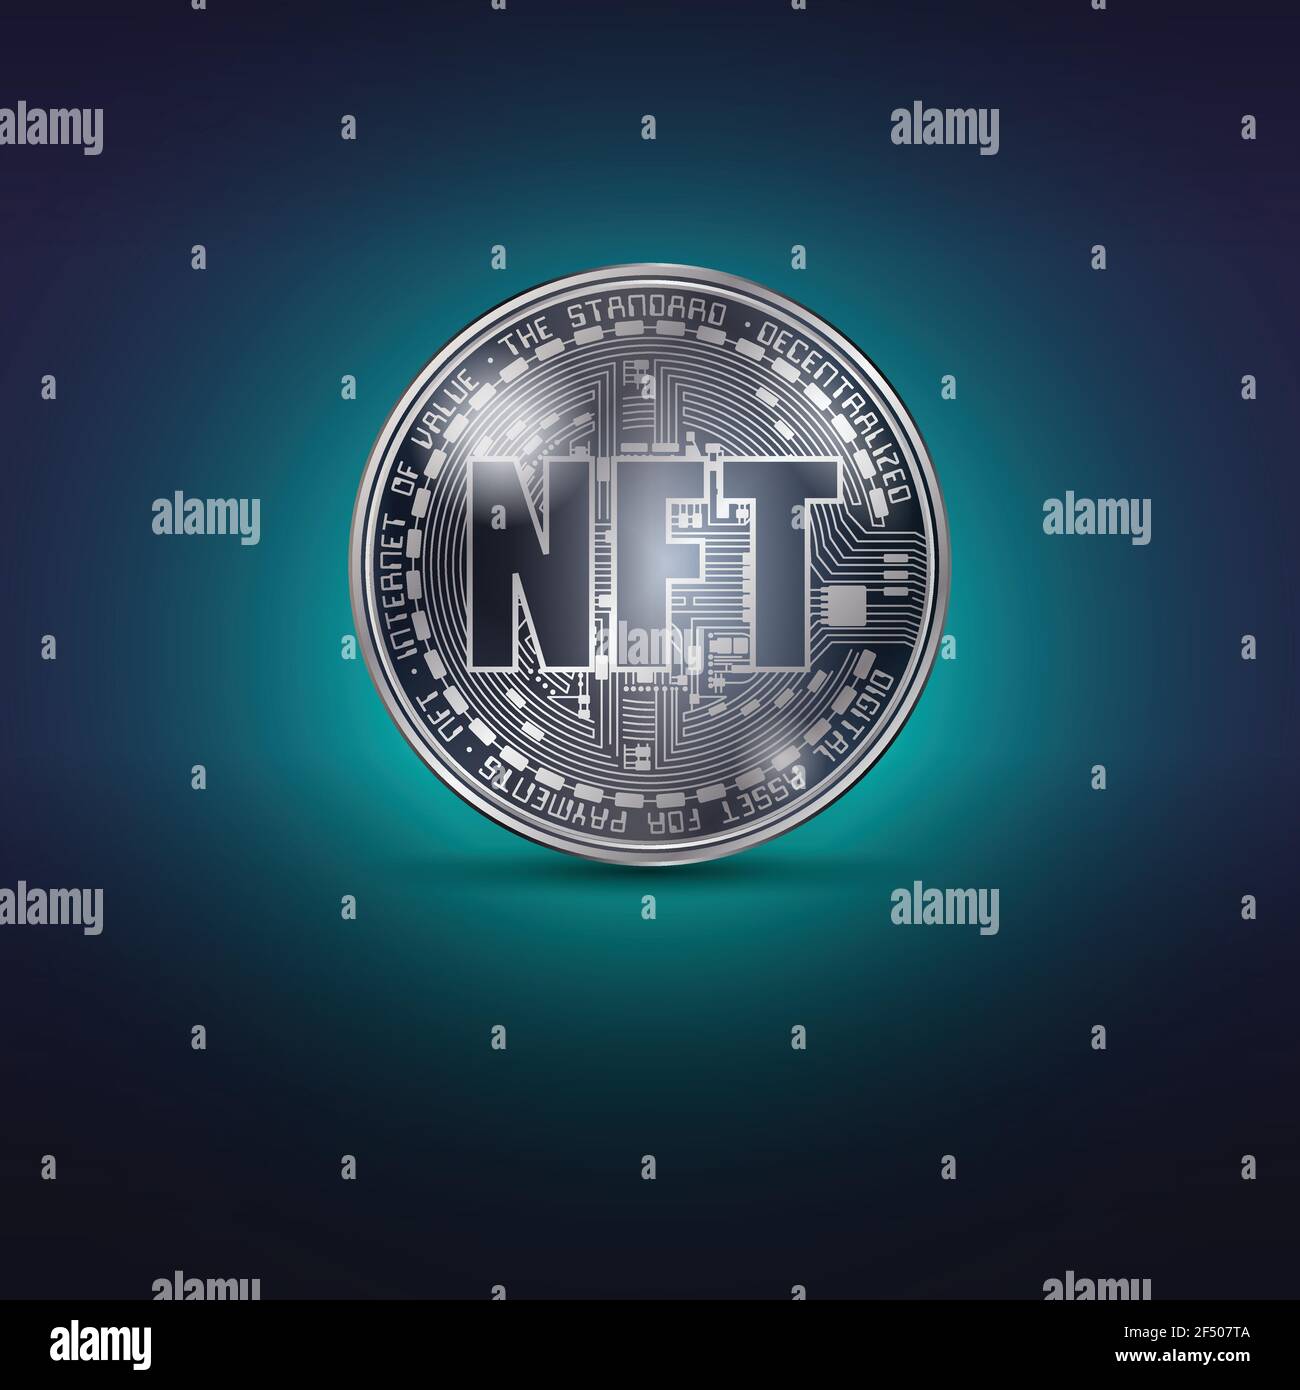 Cryptocurrency metal NFT coin Stock Vector